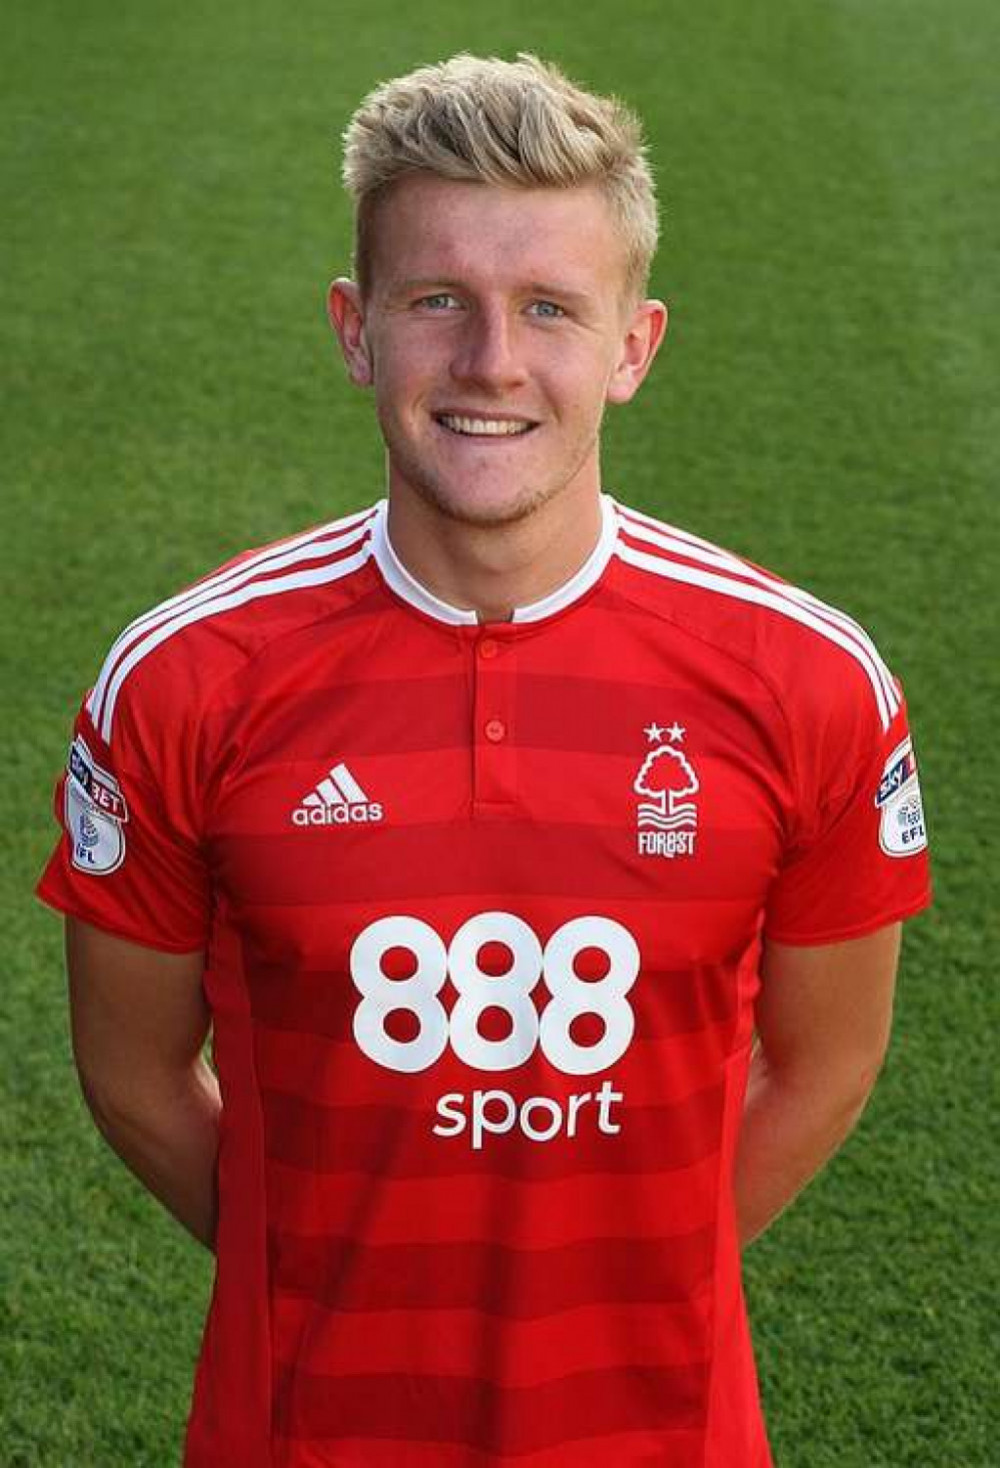 Hucknall born footballer Joe Worrall (pictured) scored his first Premier League goal on Saturday. Photo Credit: Nottingham Forest F.C. This file is made available under the Creative Commons CC0 1.0 Universal Public Domain Dedication.